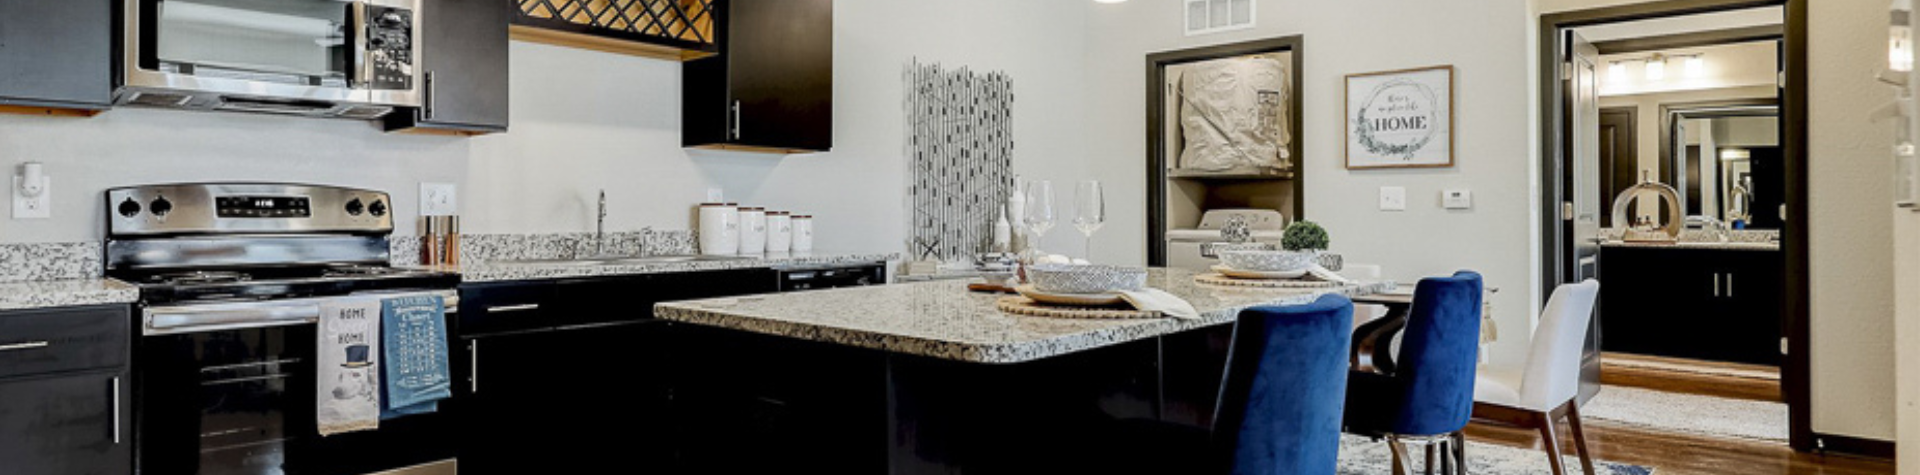 Luxury kitchen at Springs at Sunfield apartments in Buda, TX.